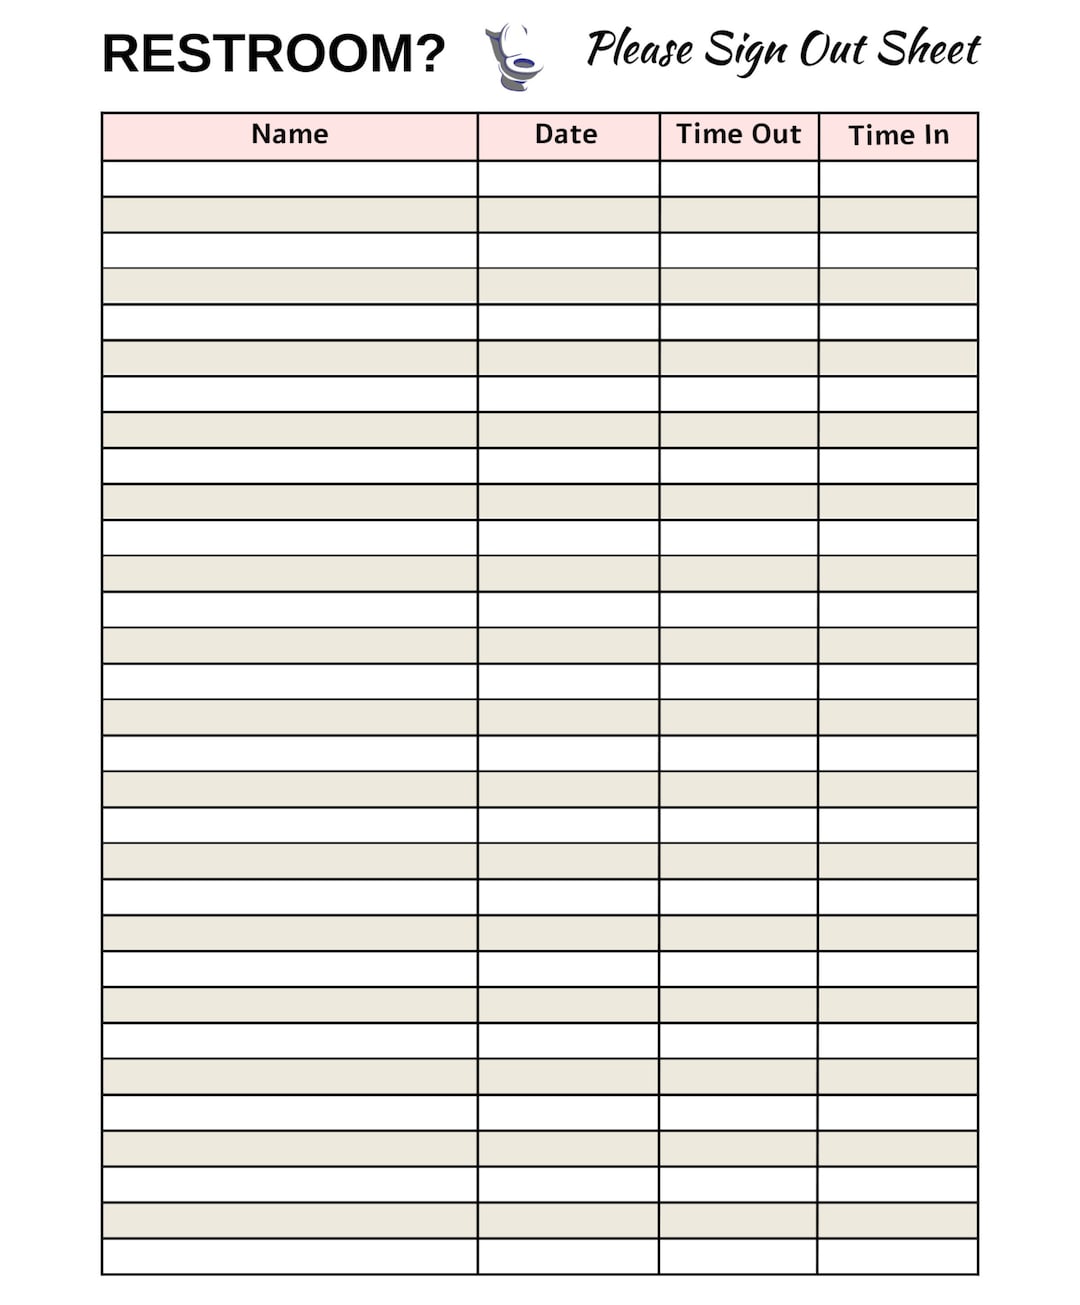 Restroom Sign Out Sheet Printable, Classroom Organization Template Etsy